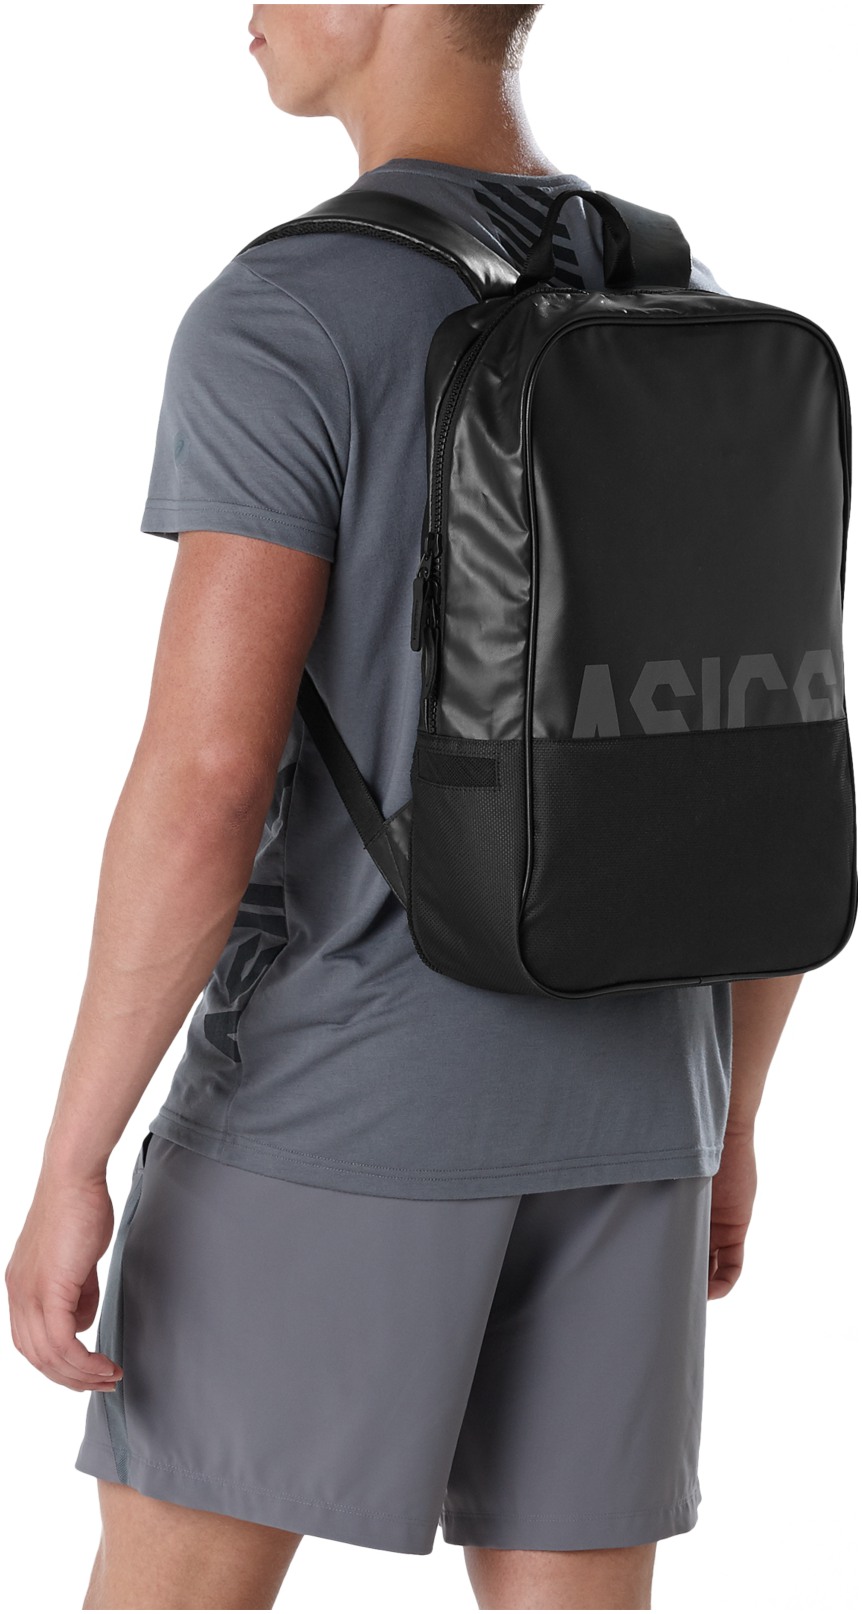 Antibiotics Colonial paste Backpack Asics TR CORE BACKPACK | AD Sport.store